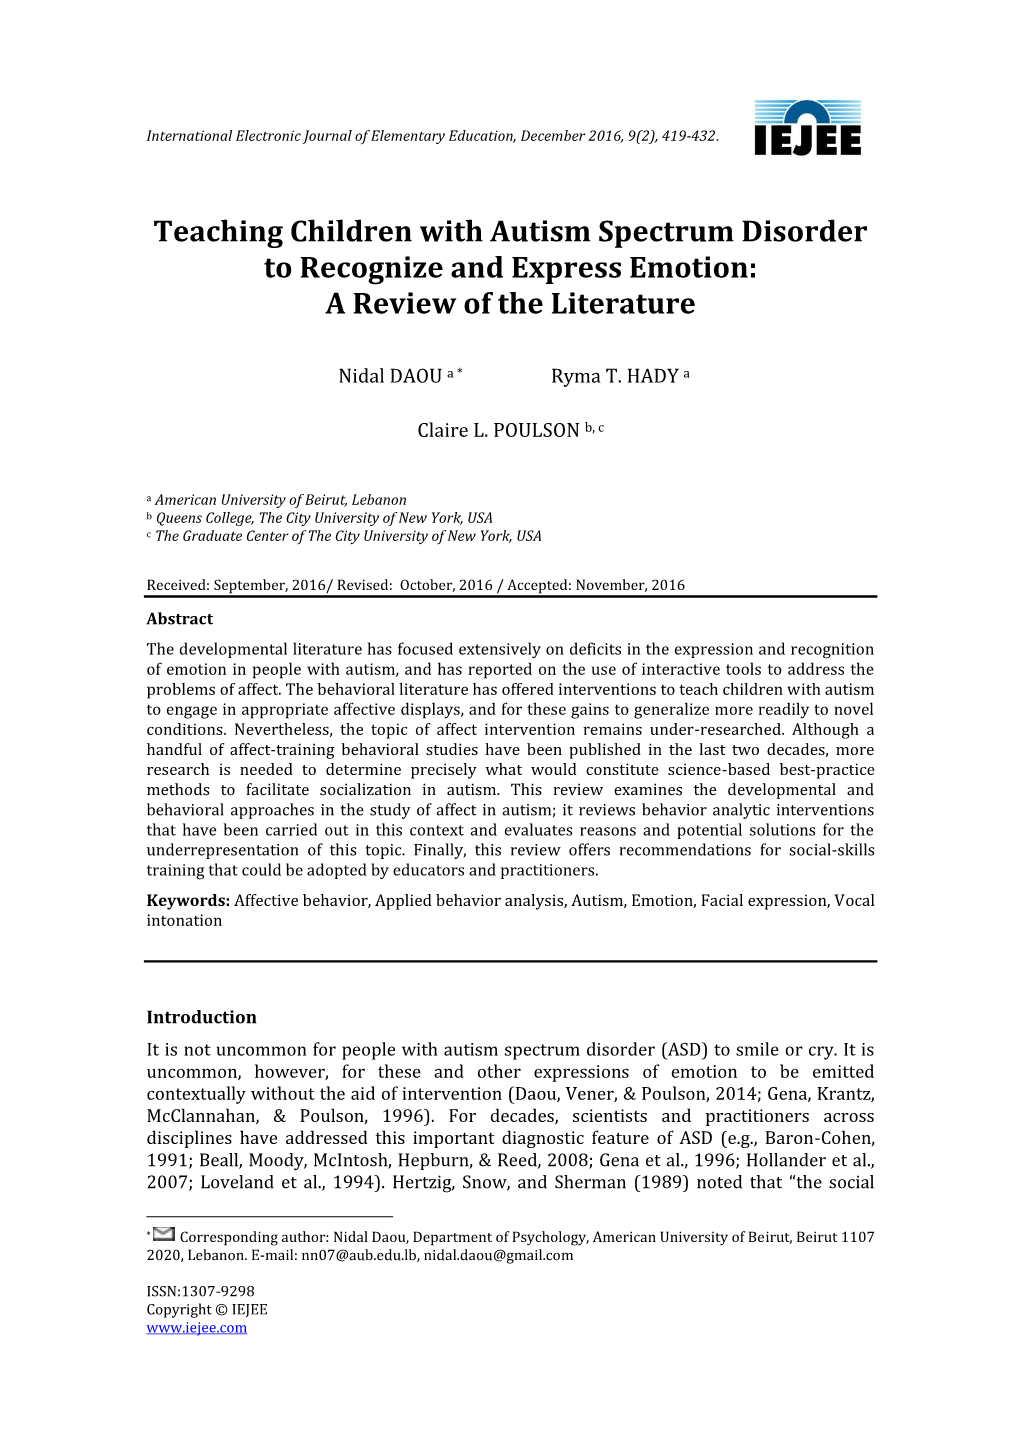 Teaching Children with Autism Spectrum Disorder to Recognize and Express Emotion: a Review of the Literature